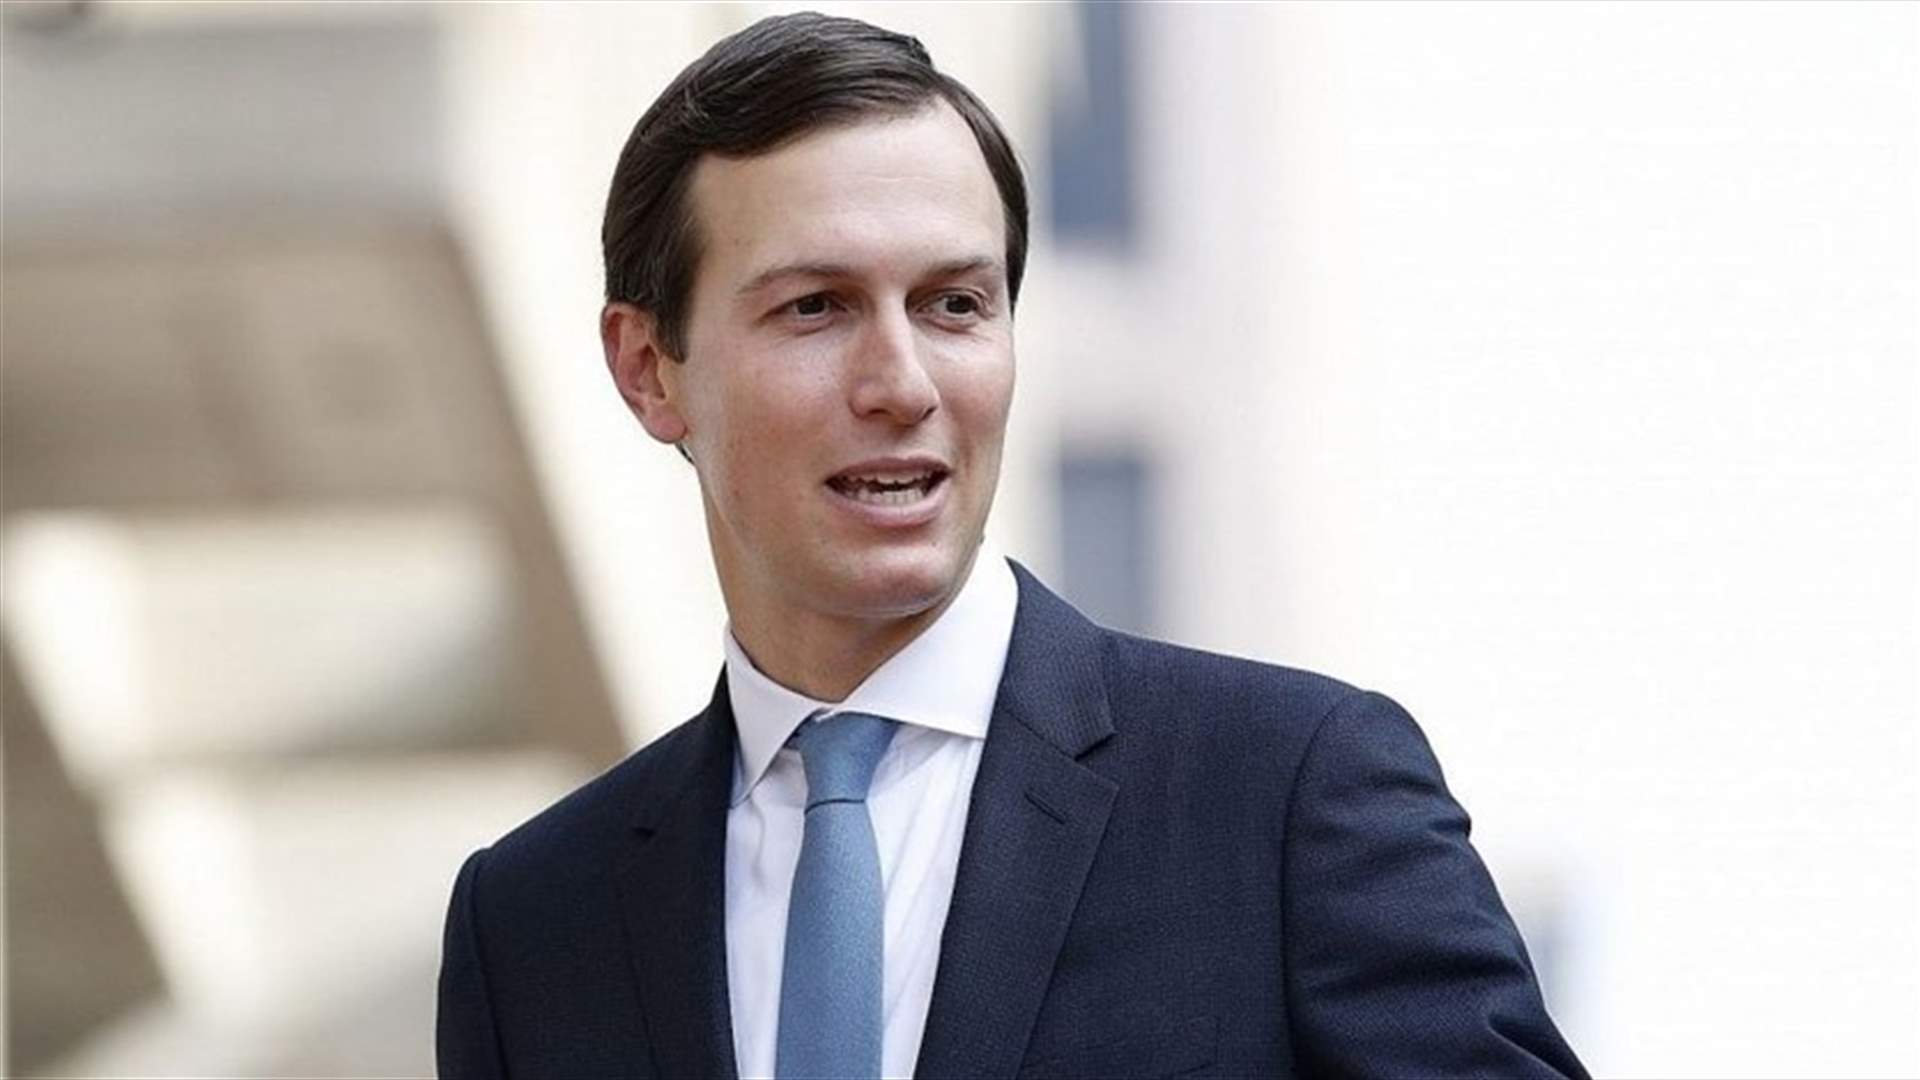 Kushner will put out political plan for Mideast conflict at &quot;right time&quot;